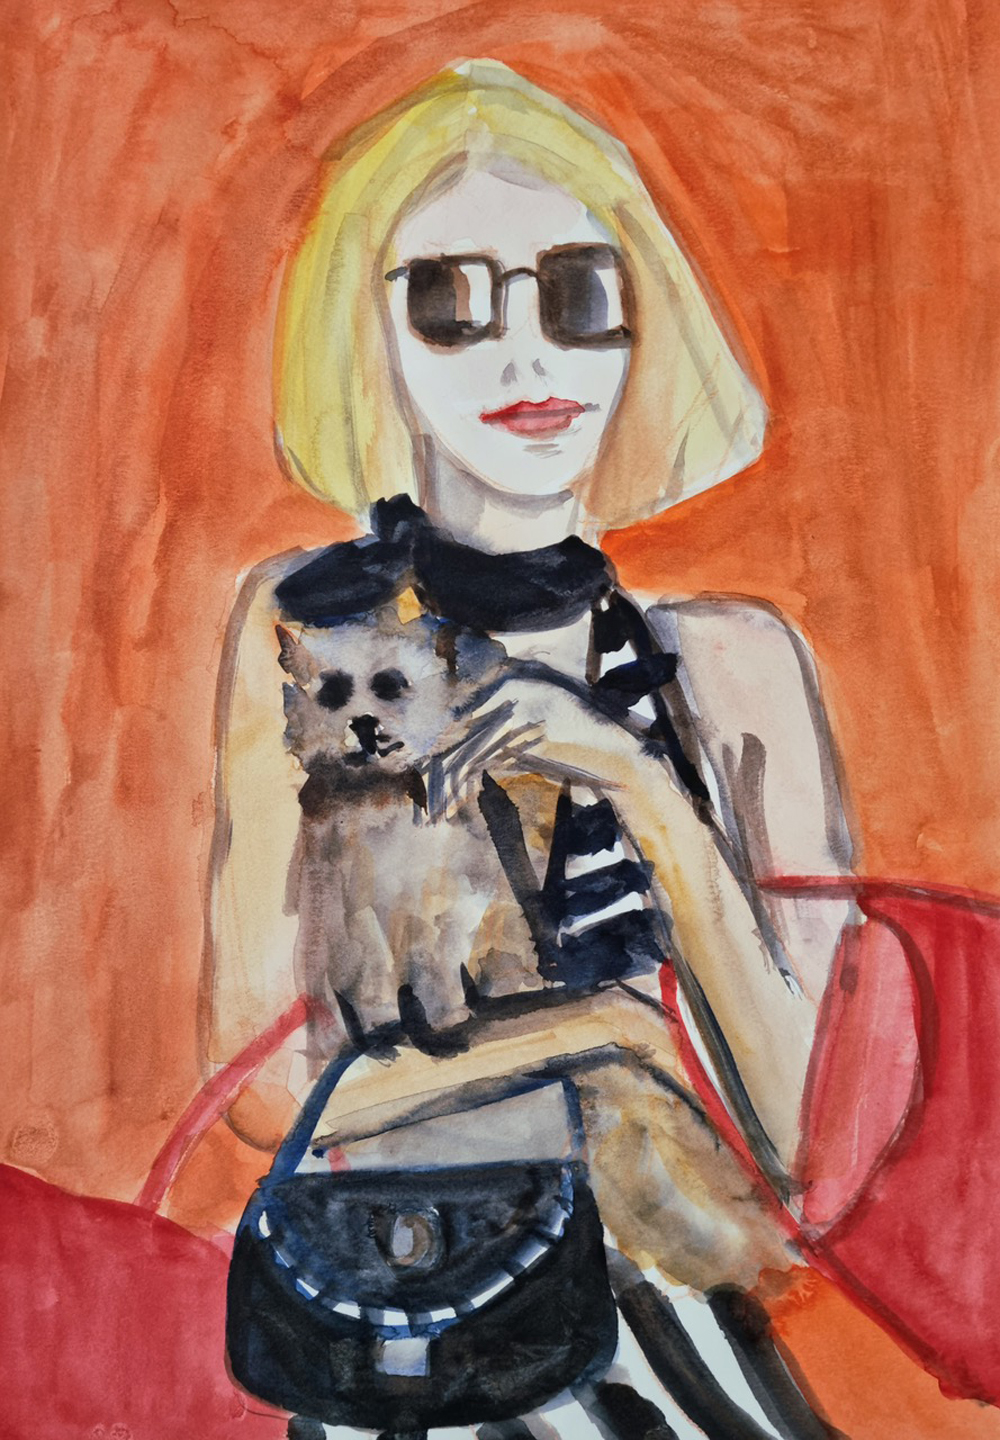 Paris Hilton and her Shopping Bags and Dog